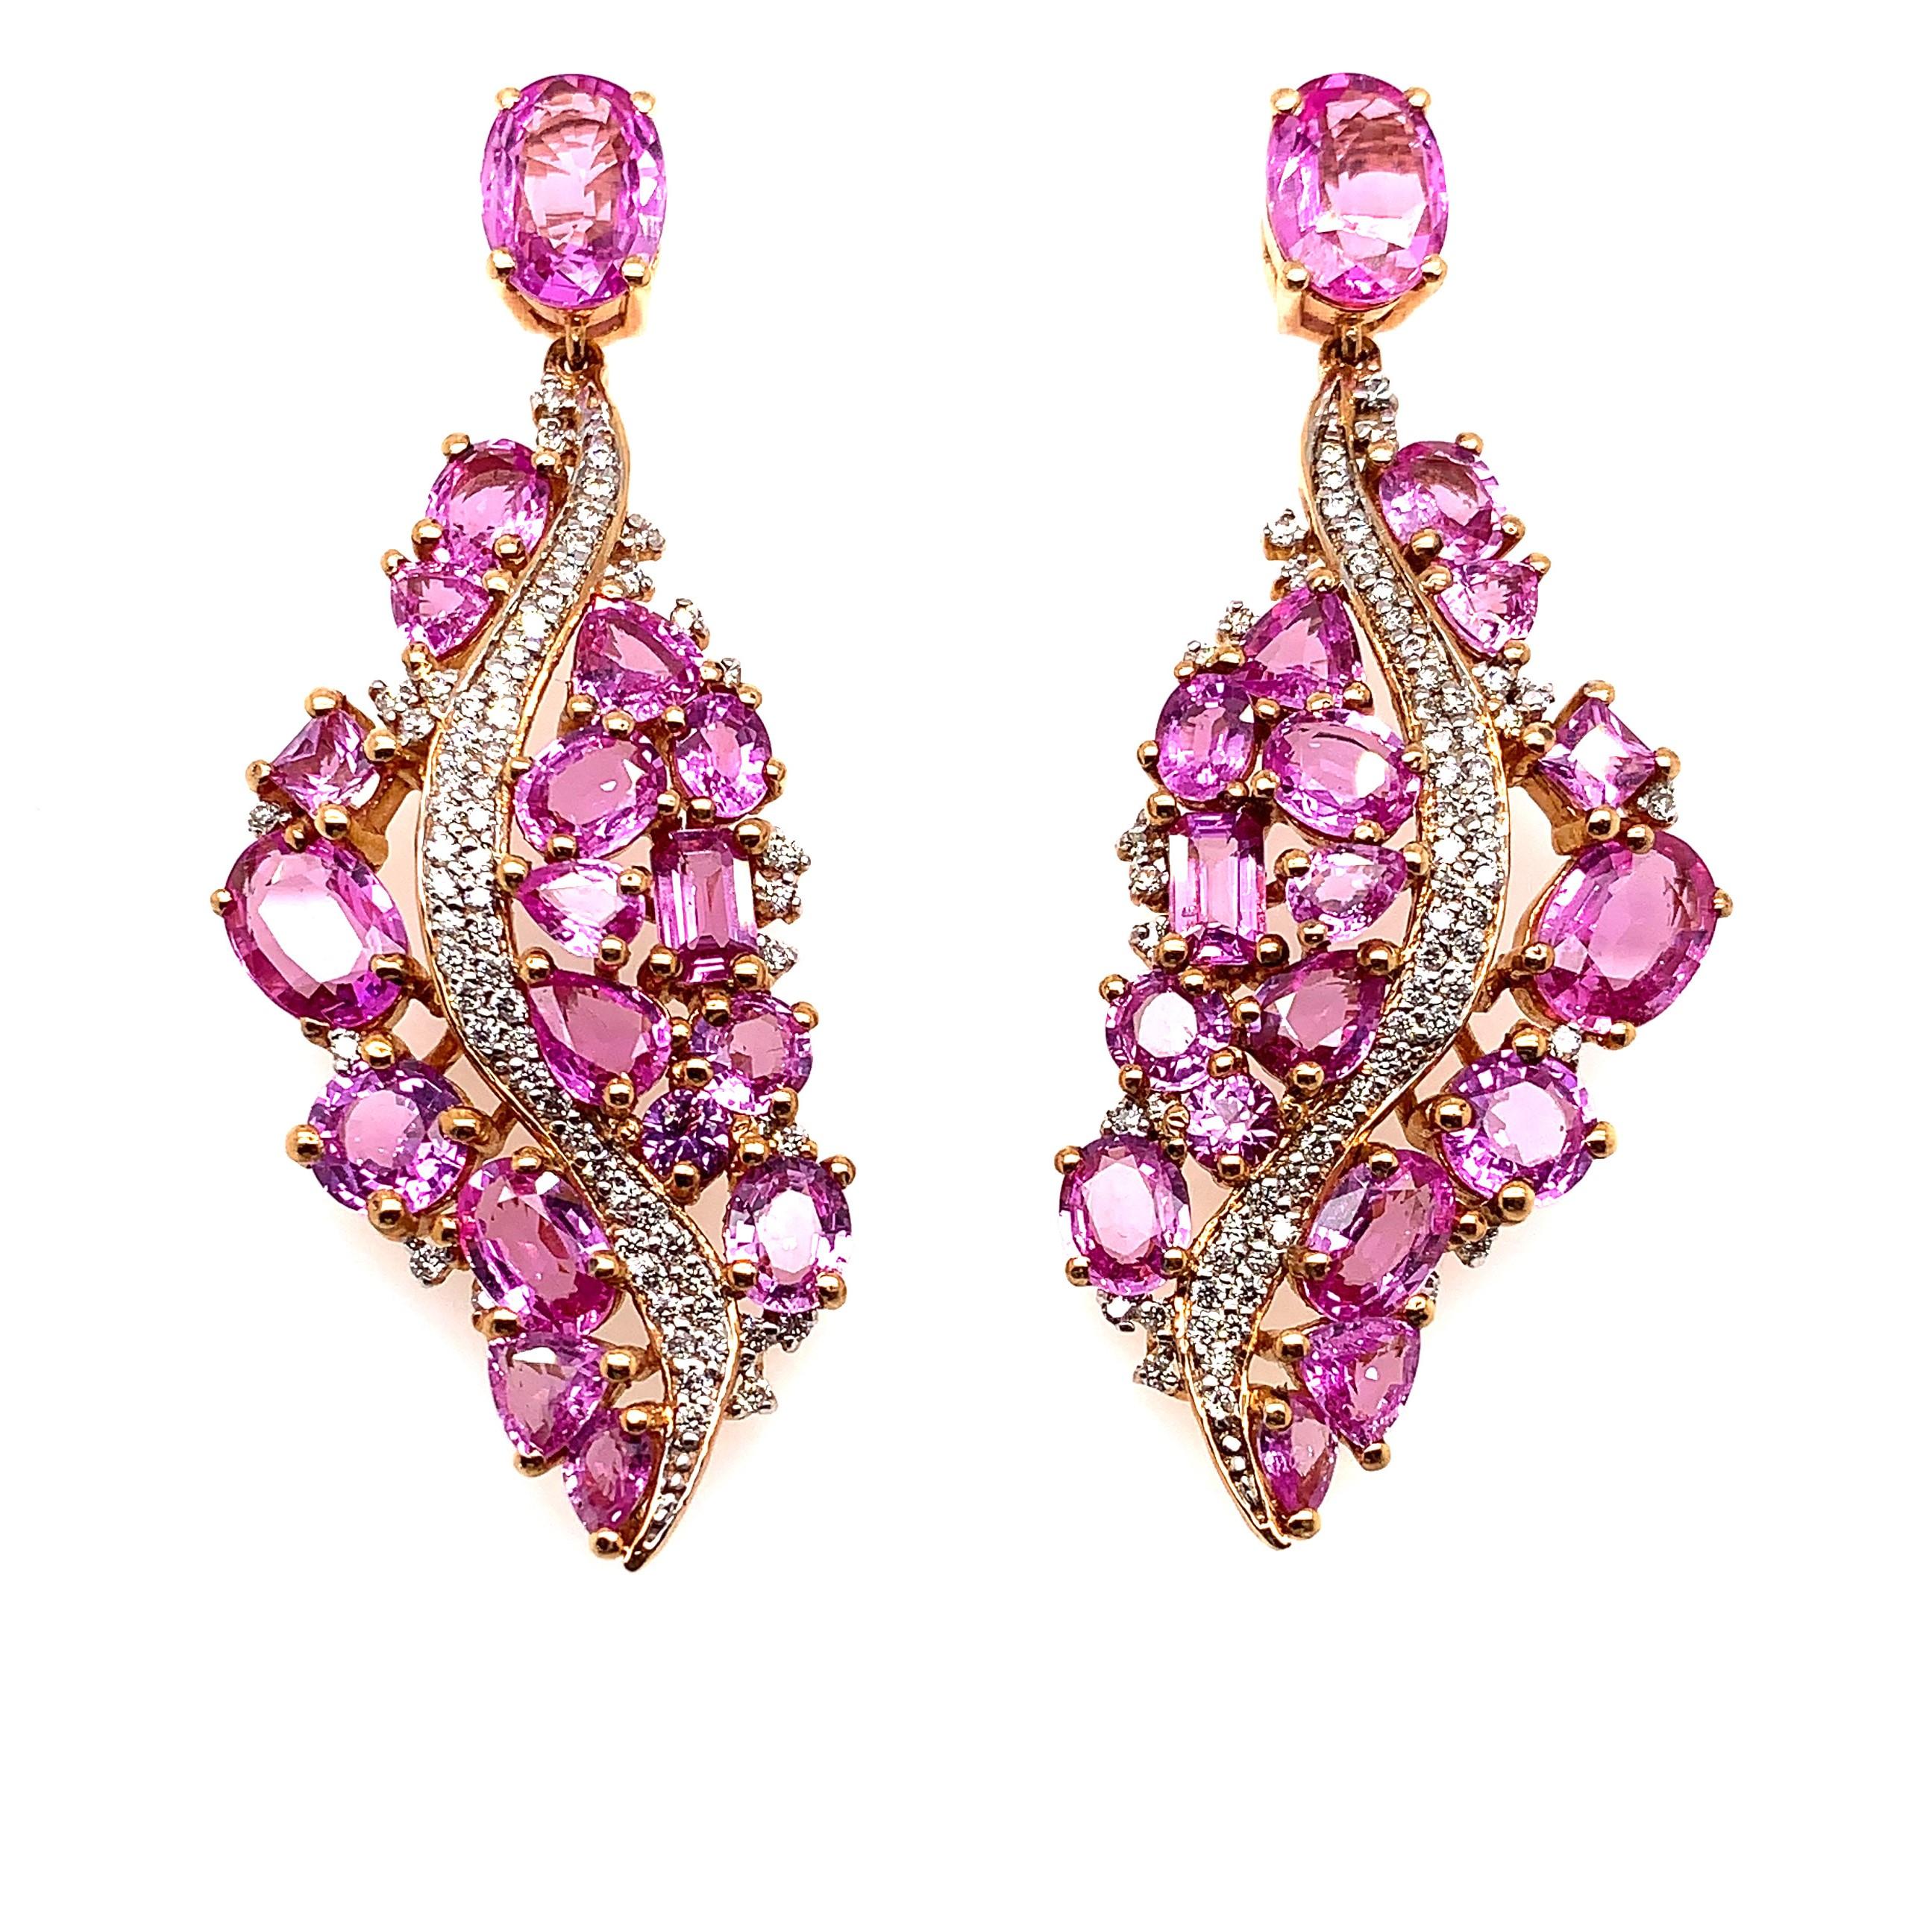 Sunita Nahata presents an exclusive collection of pink sapphire earrings. This particular earring showcases a cluster of different shapes and sizes of pink sapphires, and makes it a must have for those with an avid love for gemstones!

Designer pink